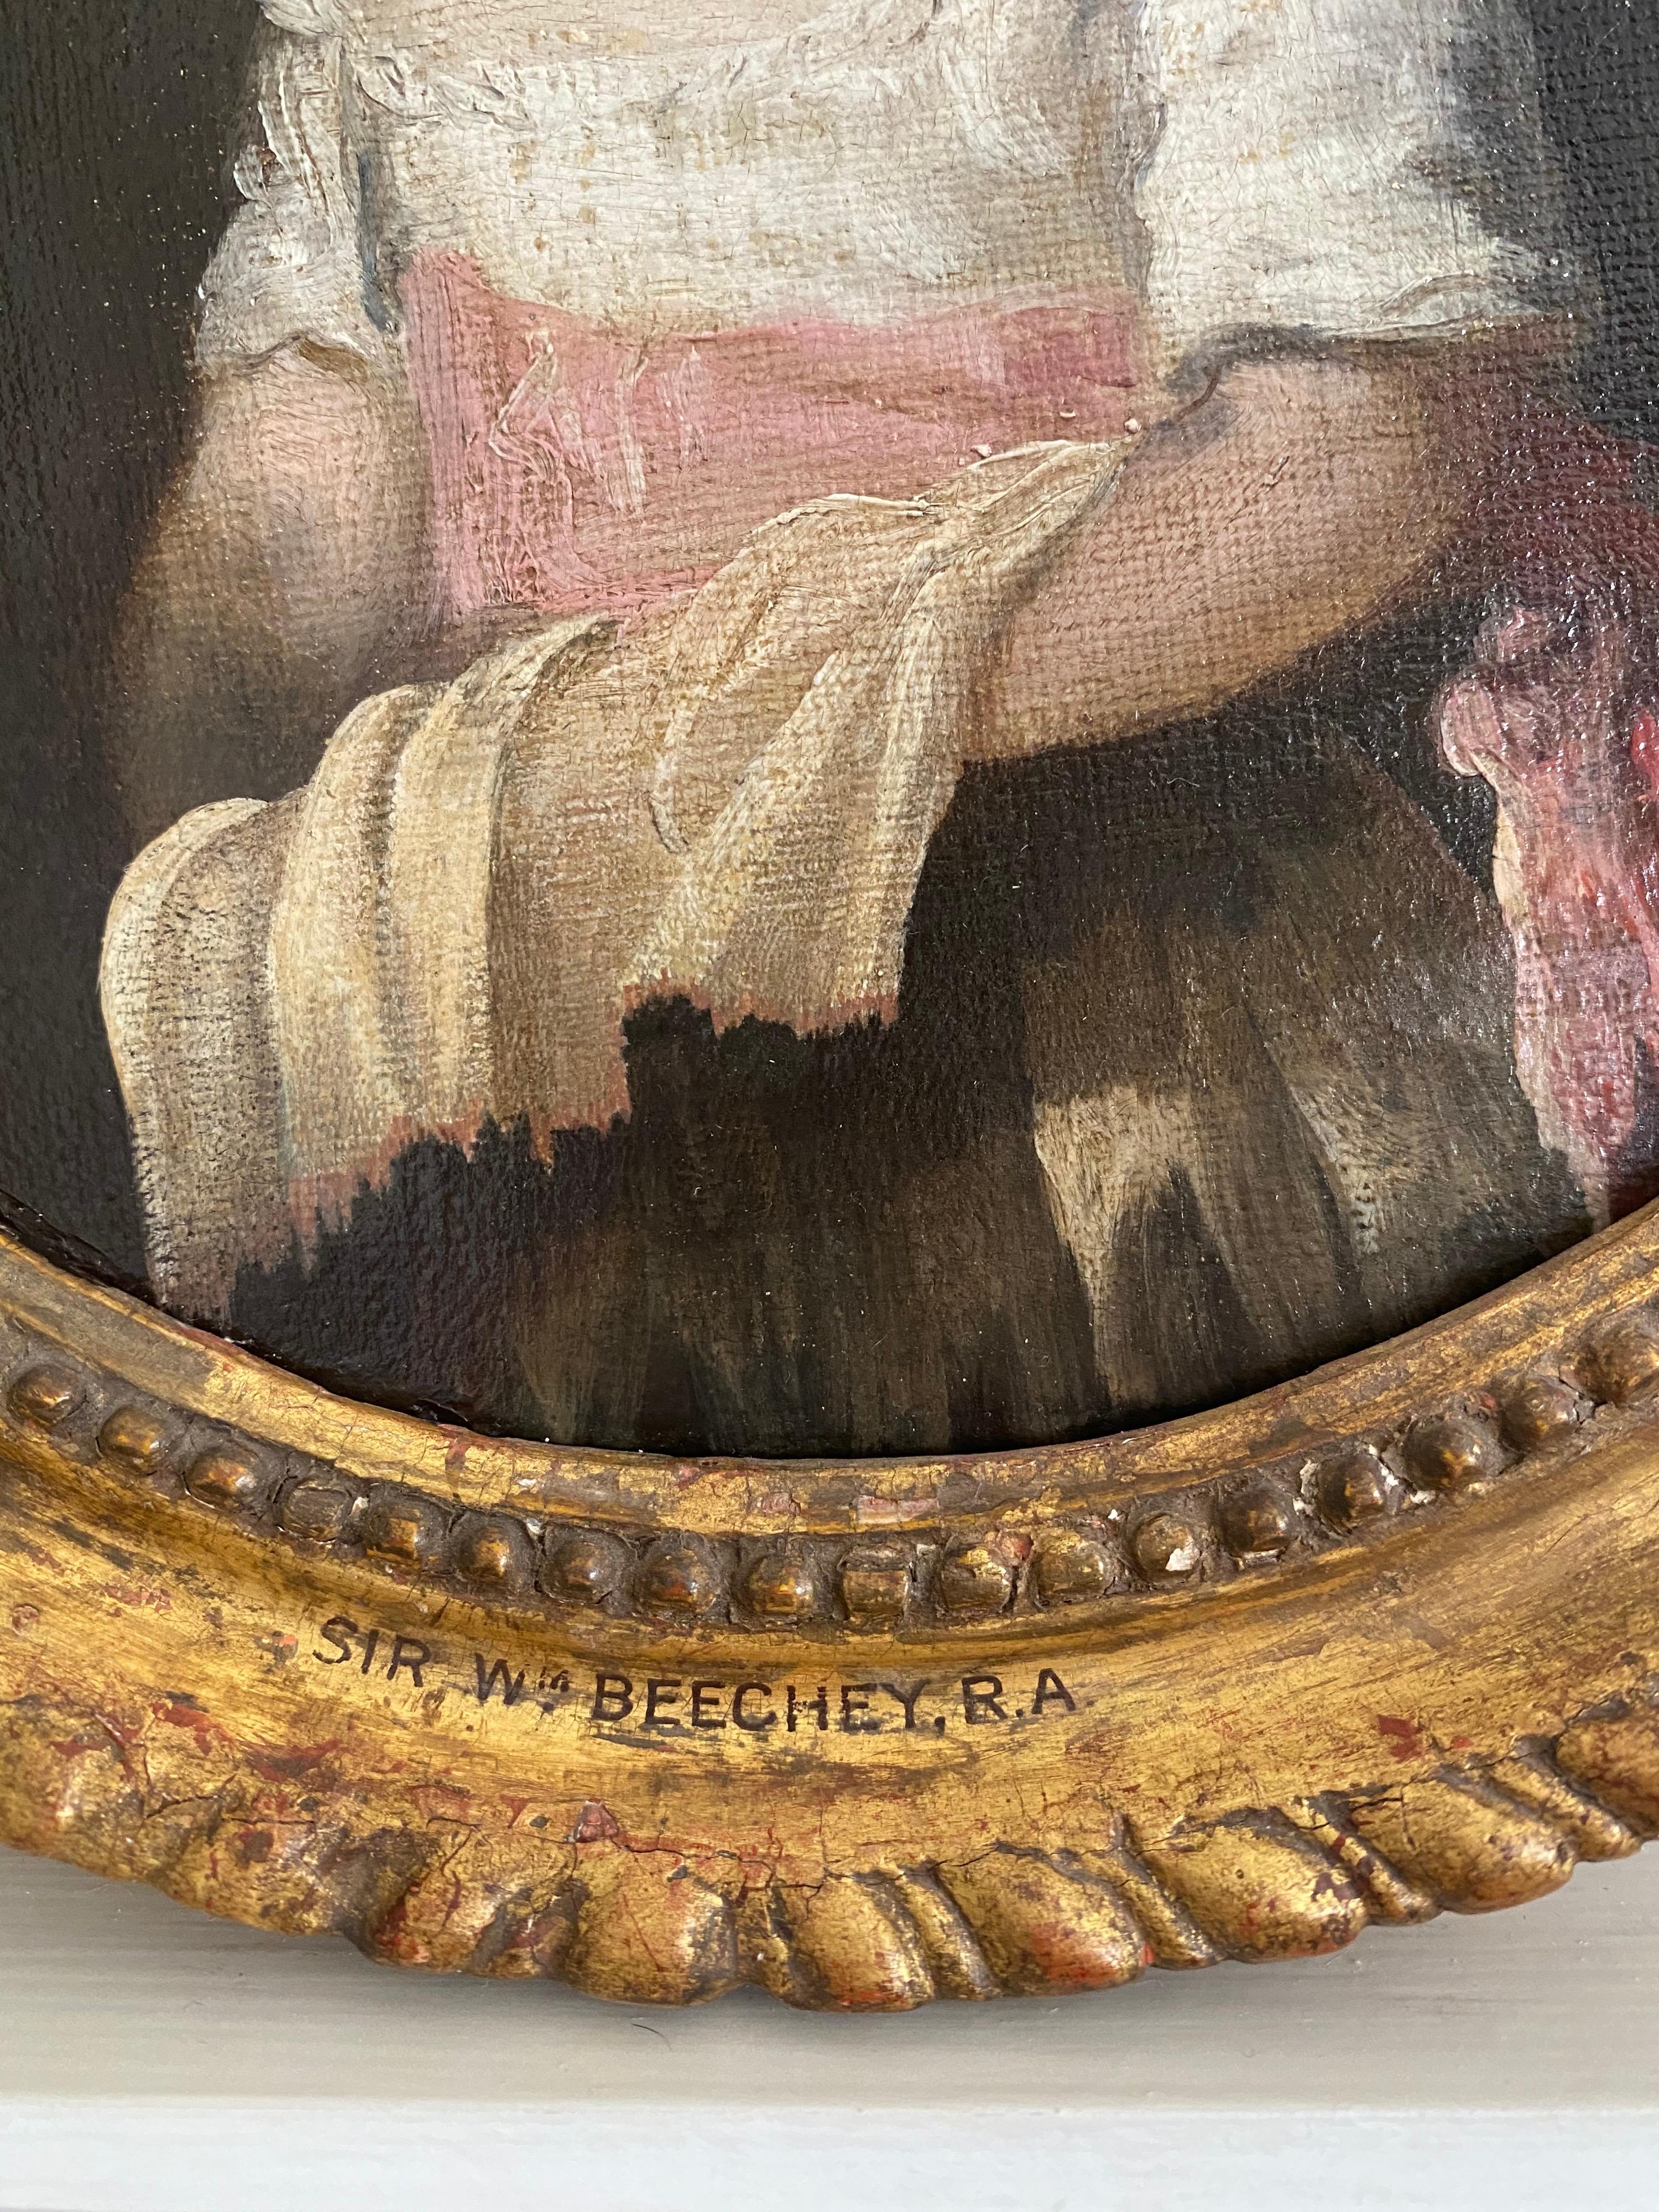 A charming smaller scale 18th century portrait of a young girl in a pink bonnet wearing a white gown with pink sash, attributed to Sir William Beechey RA (1753-1839)

Oil on canvas in a period oval giltwood frame, inscribed on lower frame 'Sir W